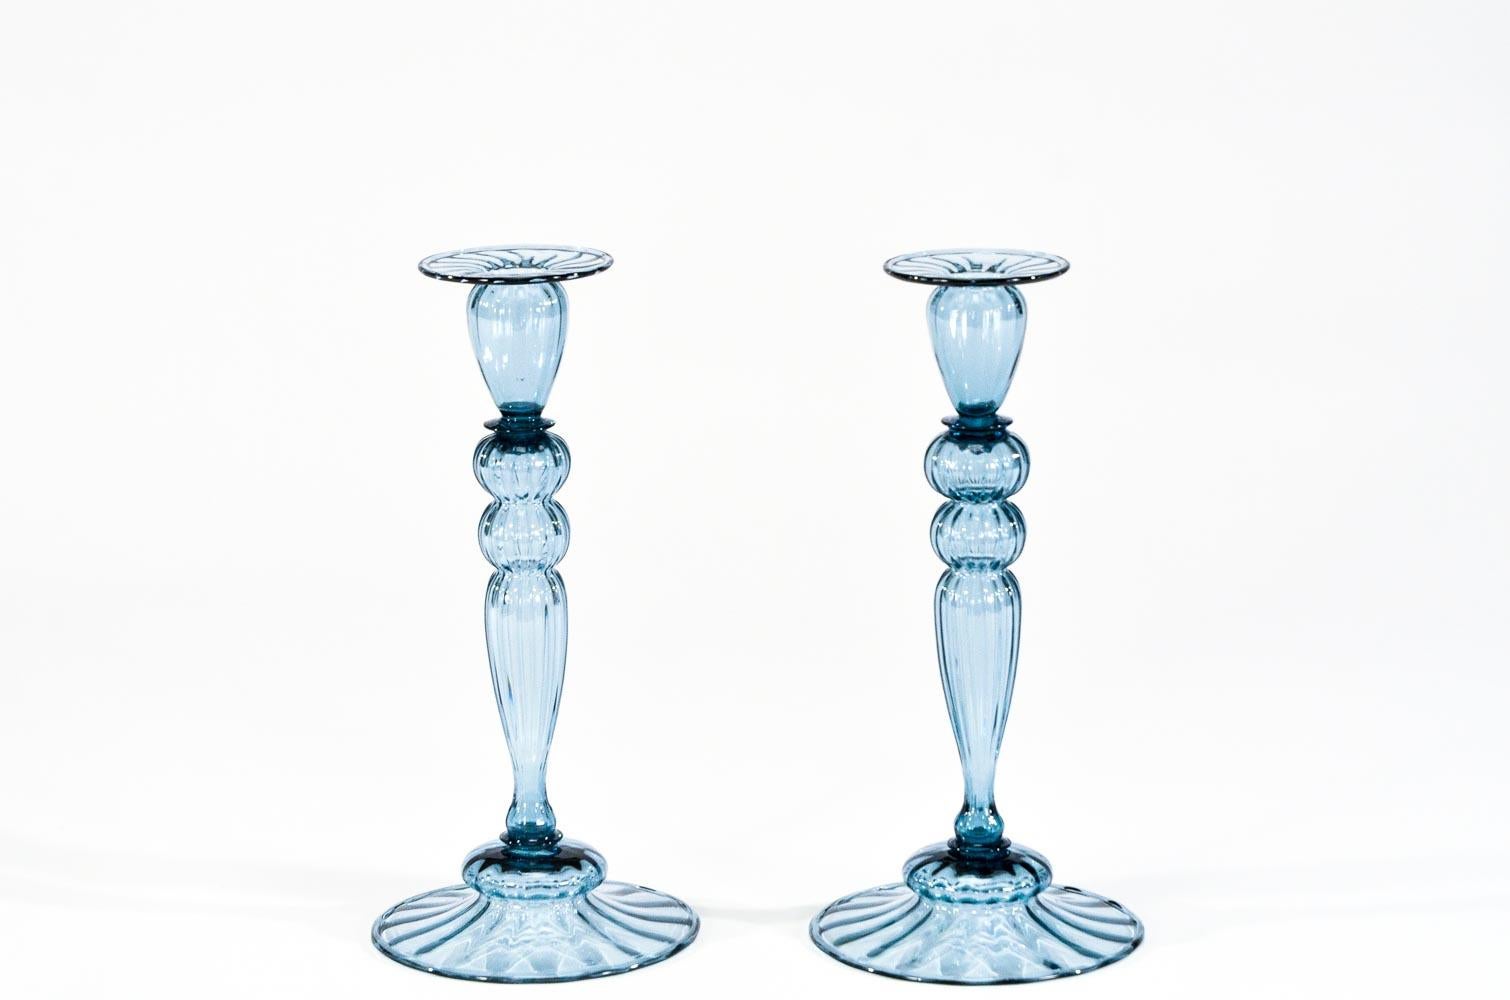 This 3-piece centerpiece set is hand blown in an unusual steel blue color which sets it apart from the more conventional colors. The optic ribbing gives them a more dimensional feel but still maintaining very clean and simple lines. The perfect